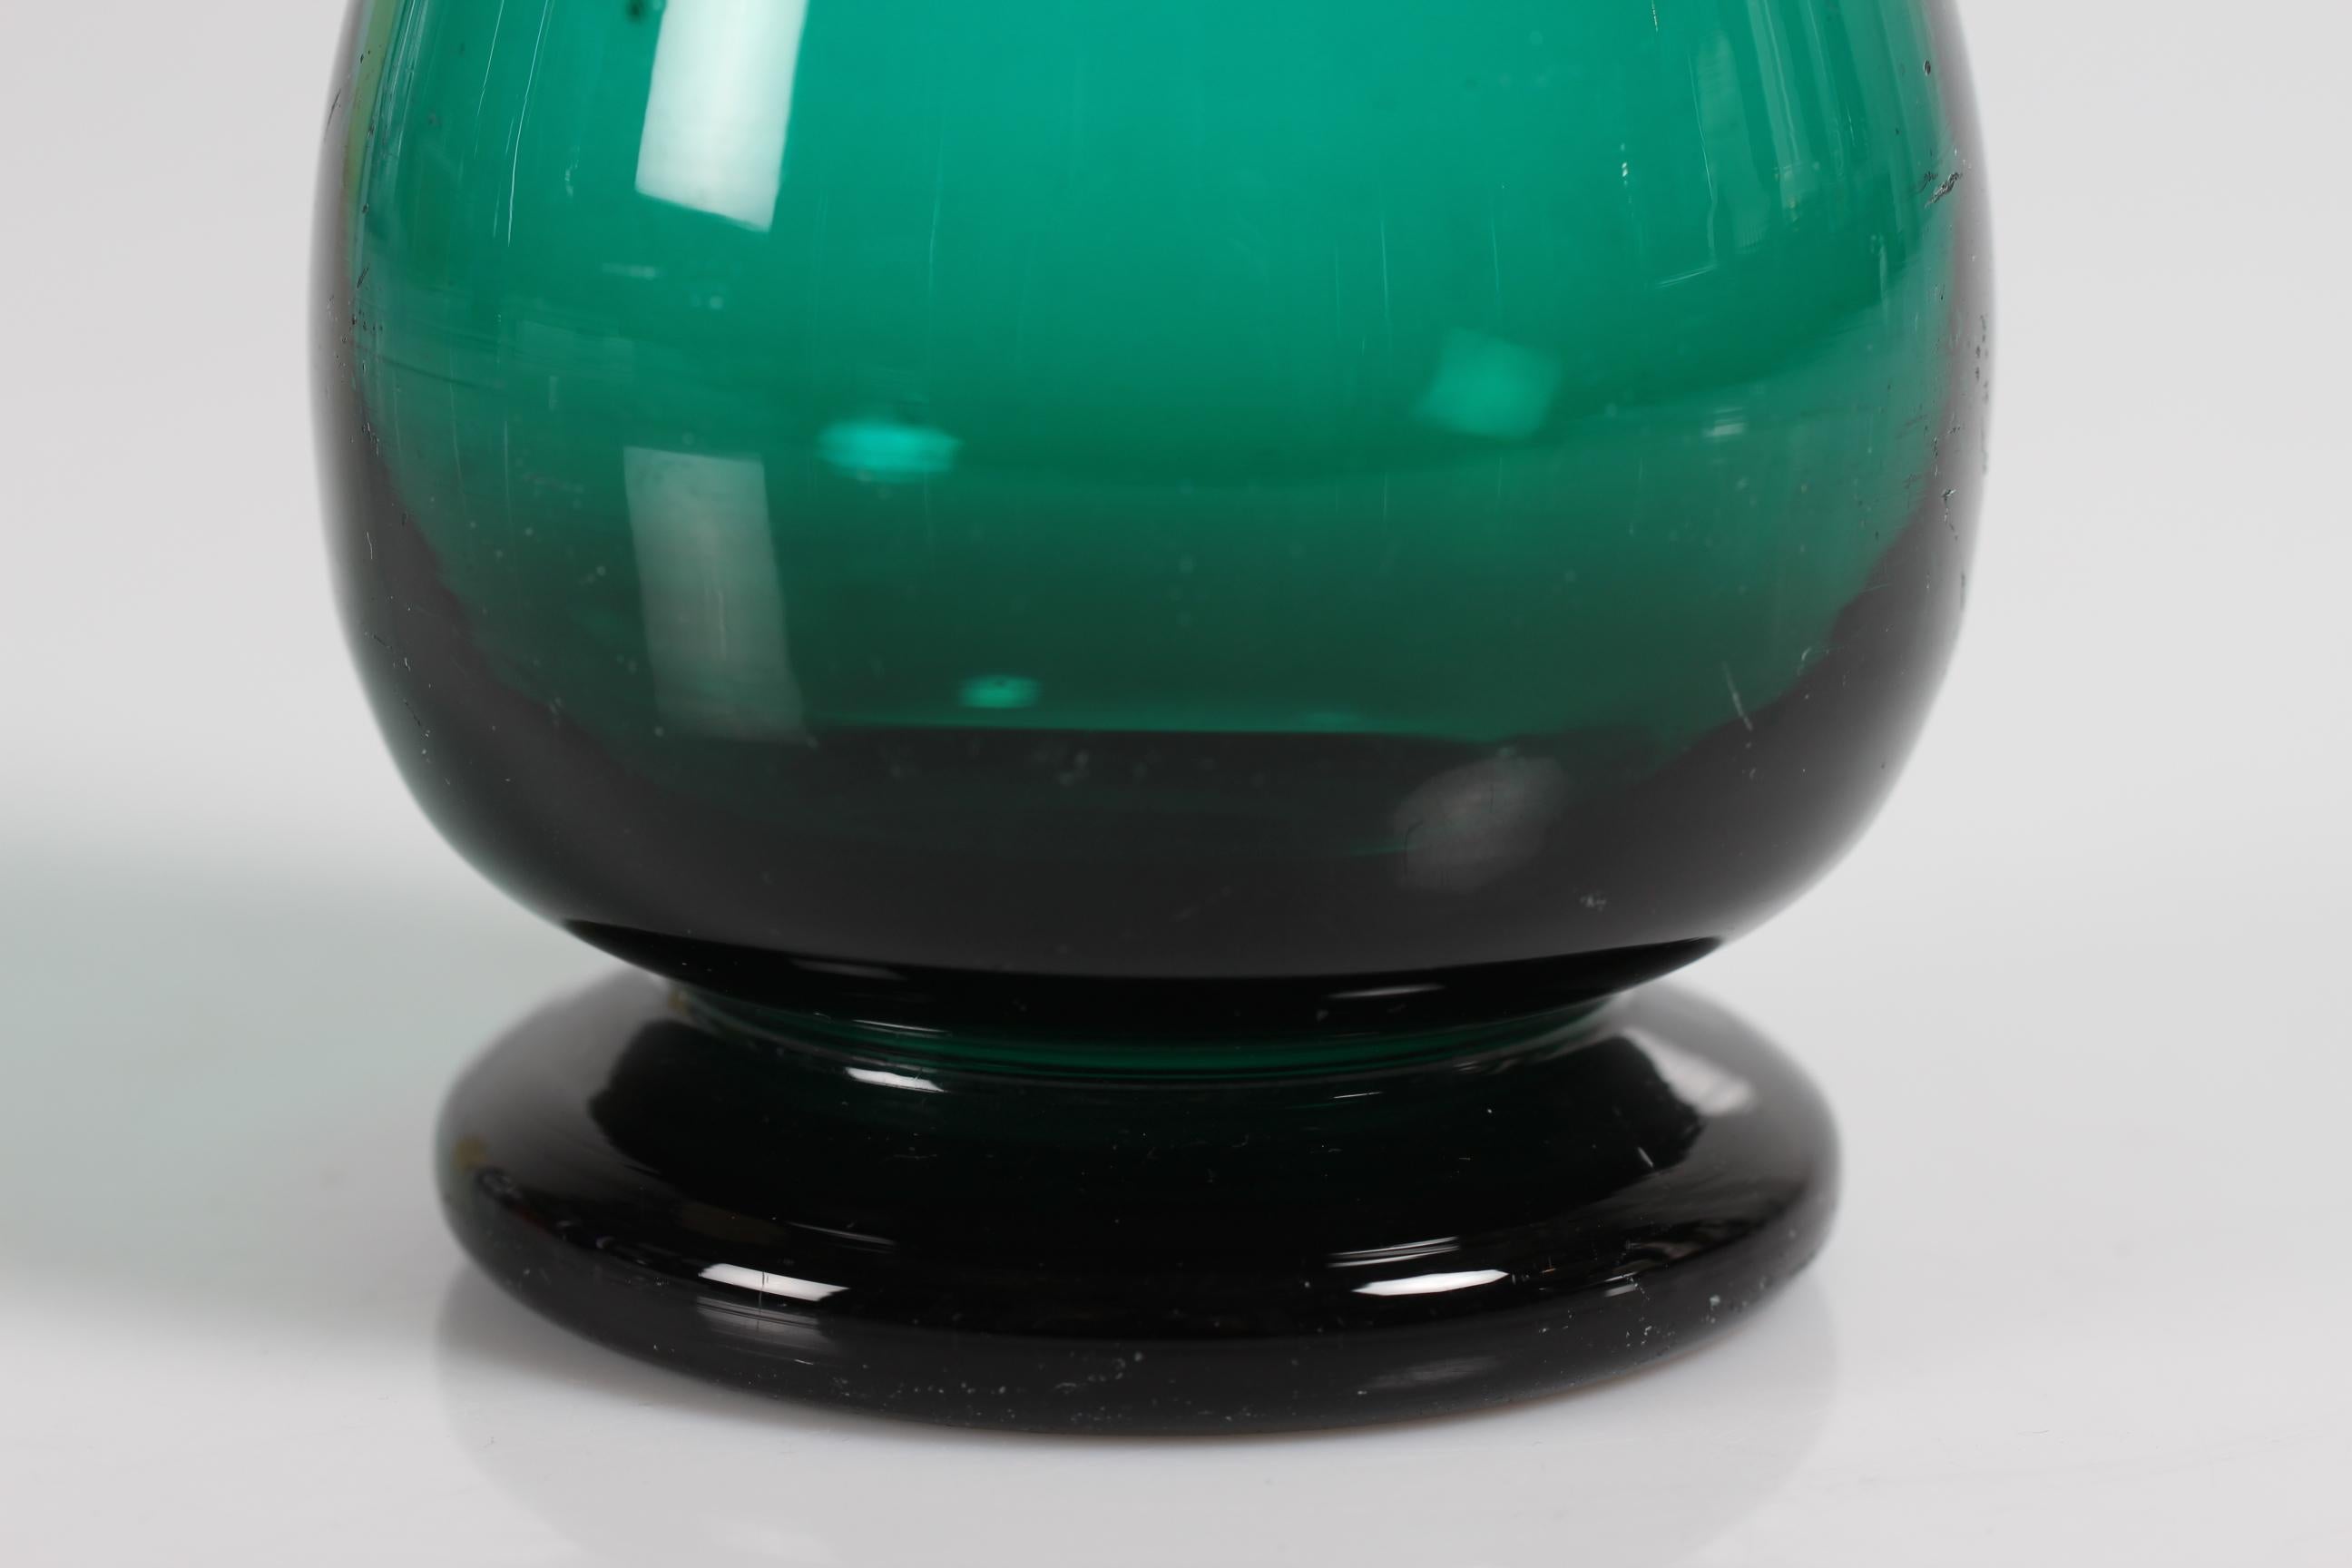 Old Danish hyacinth glass or vase from Holmegaard or Kastrup glassworks, circa 1850.
It is registered in the Holmegaard catalog in 1853

The smooth mouth blown green glass has a baluster form and a small foot

Measures: Height 21 cm
Diameter 8